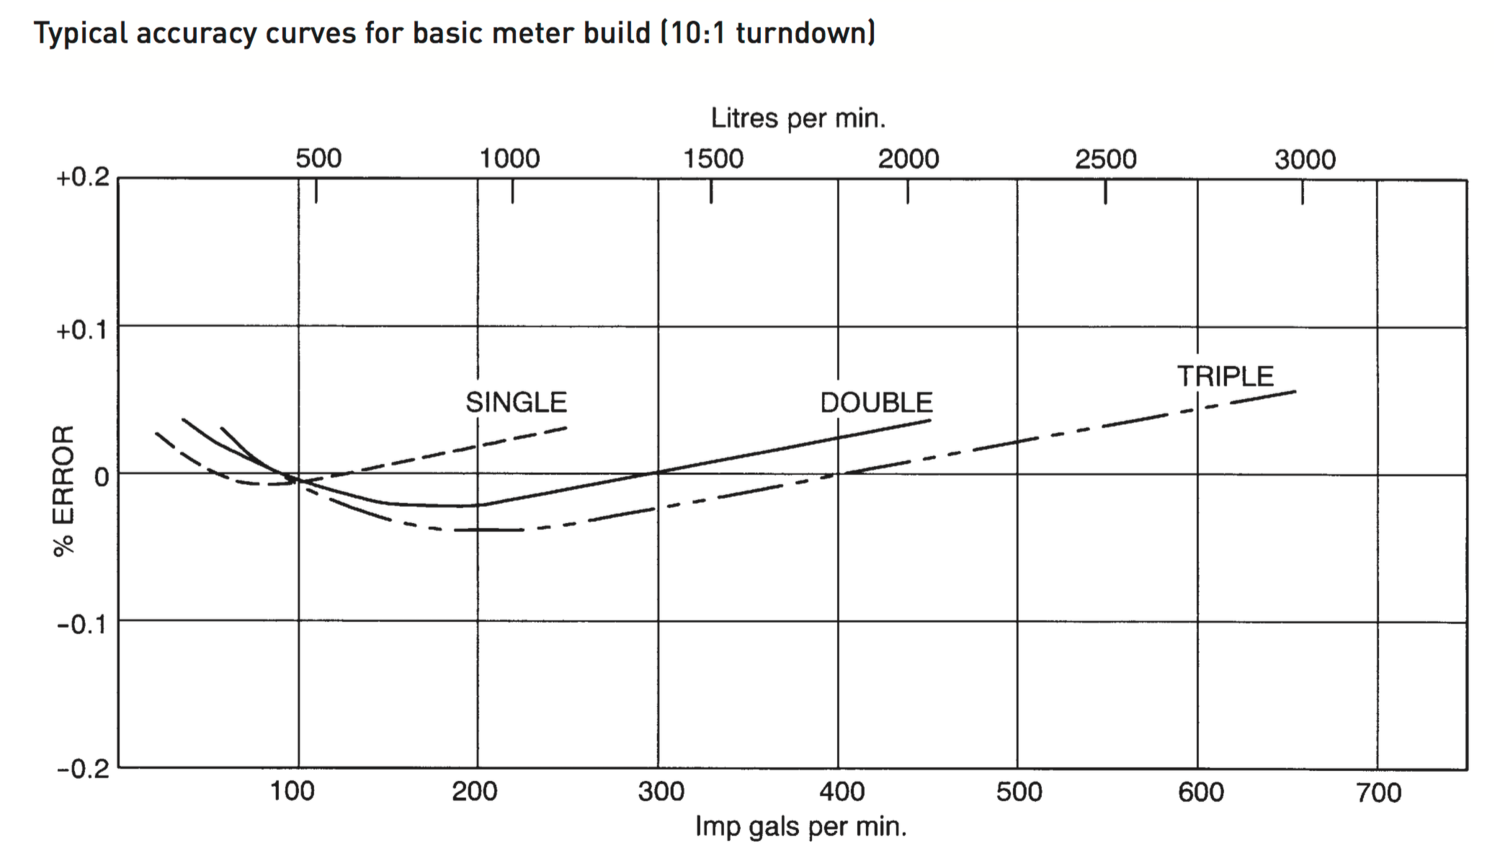 Typical accuracy curves for basic meter build (10:1 turndown)